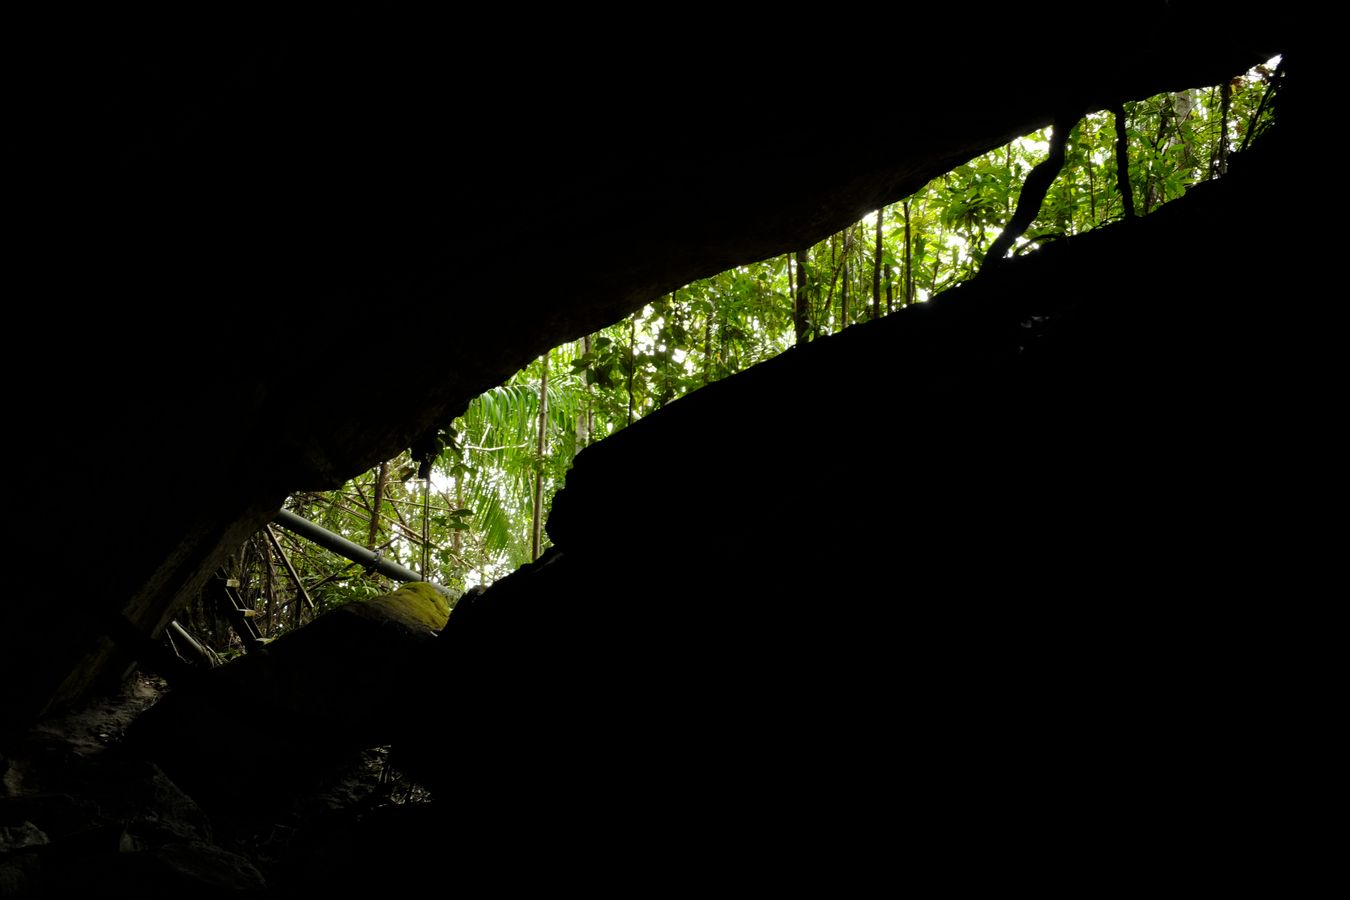 Partial view of Dipterocarp forest from inside a cave